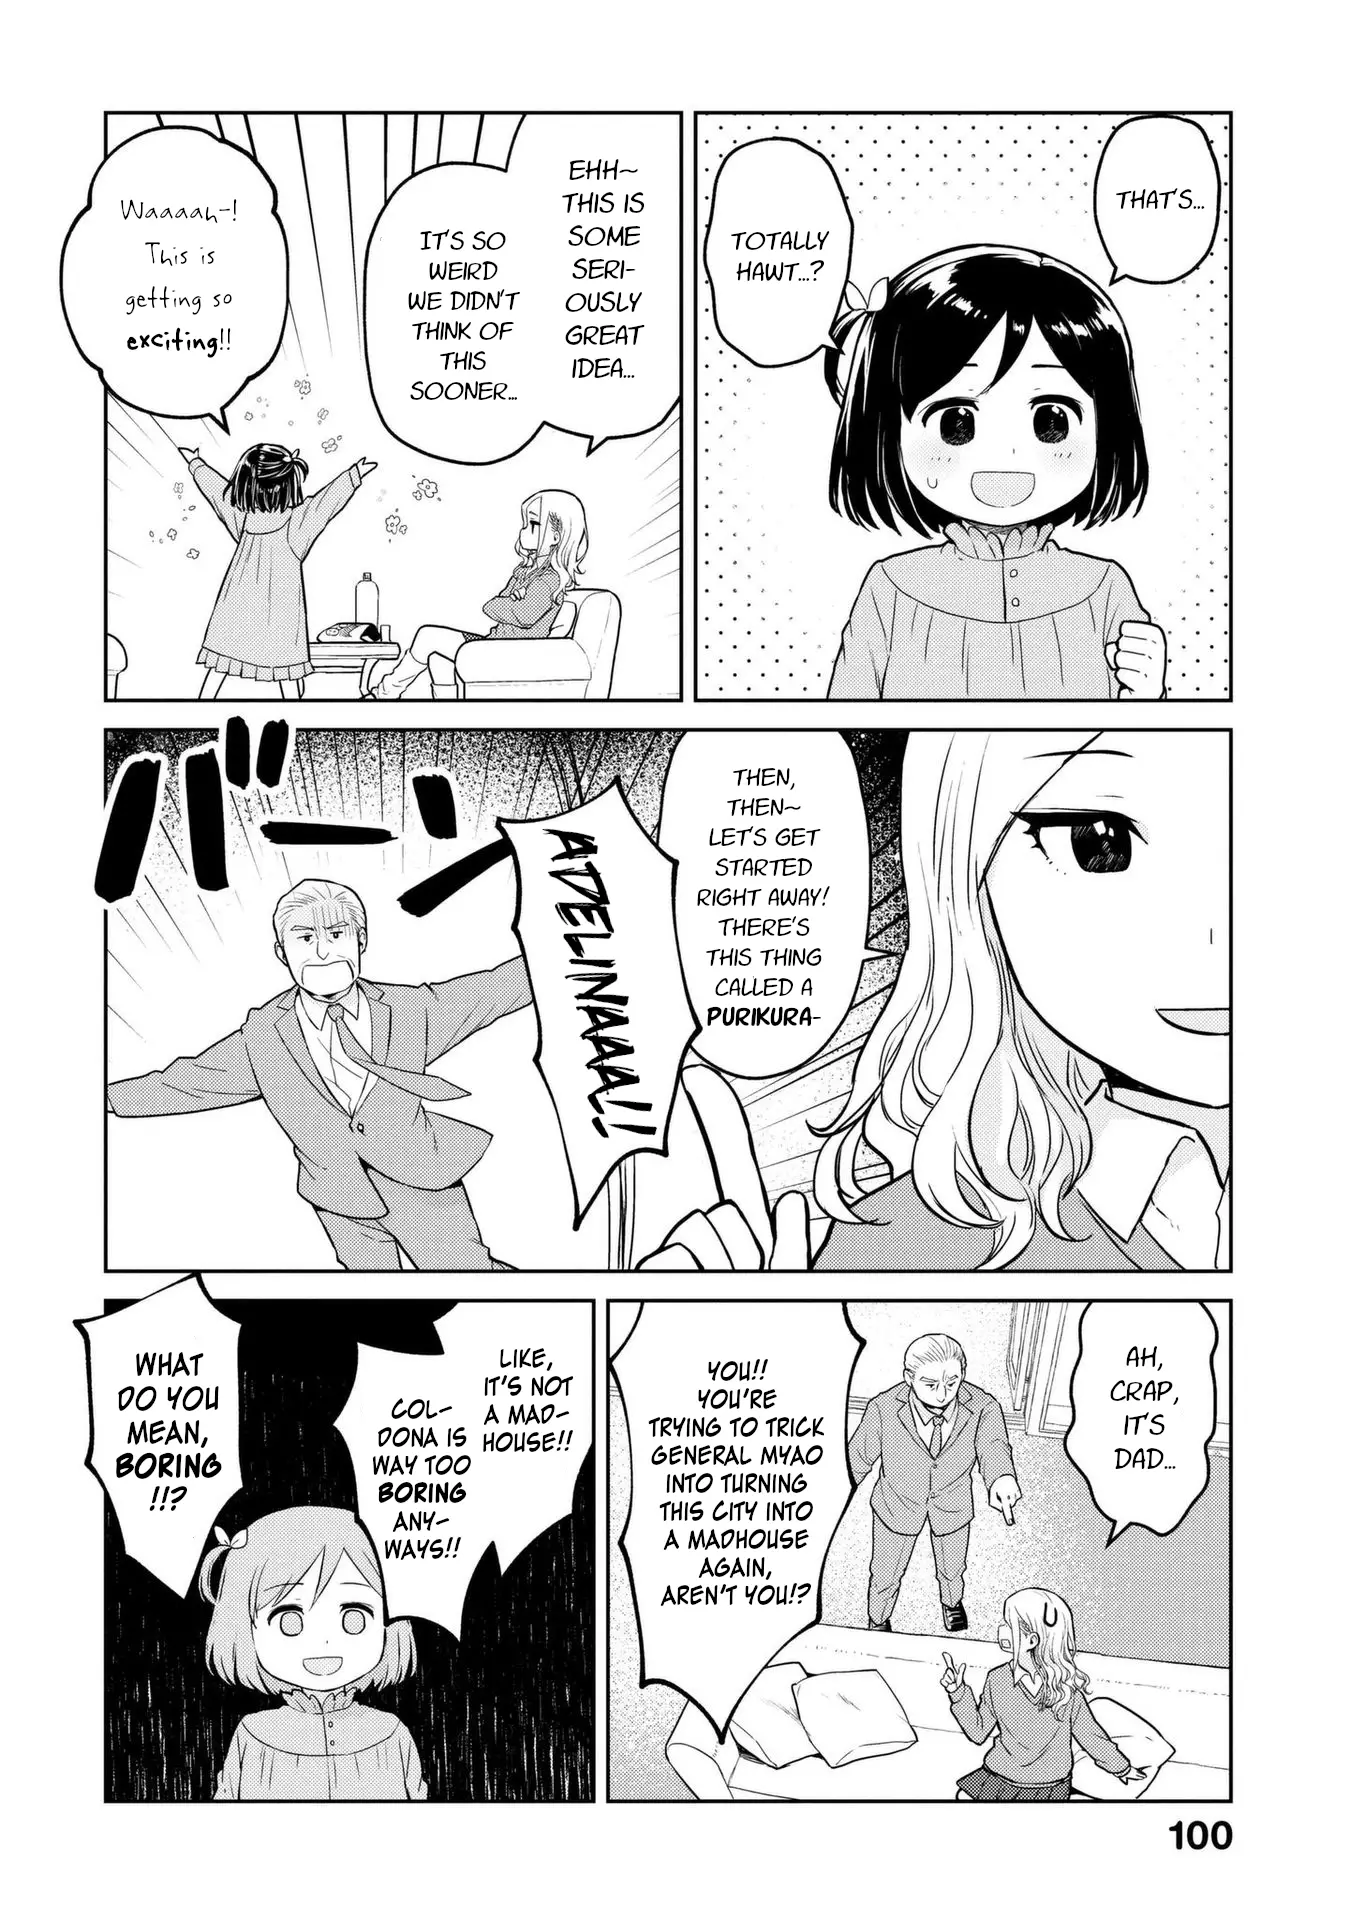 Oh, Our General Myao - 10 page 8